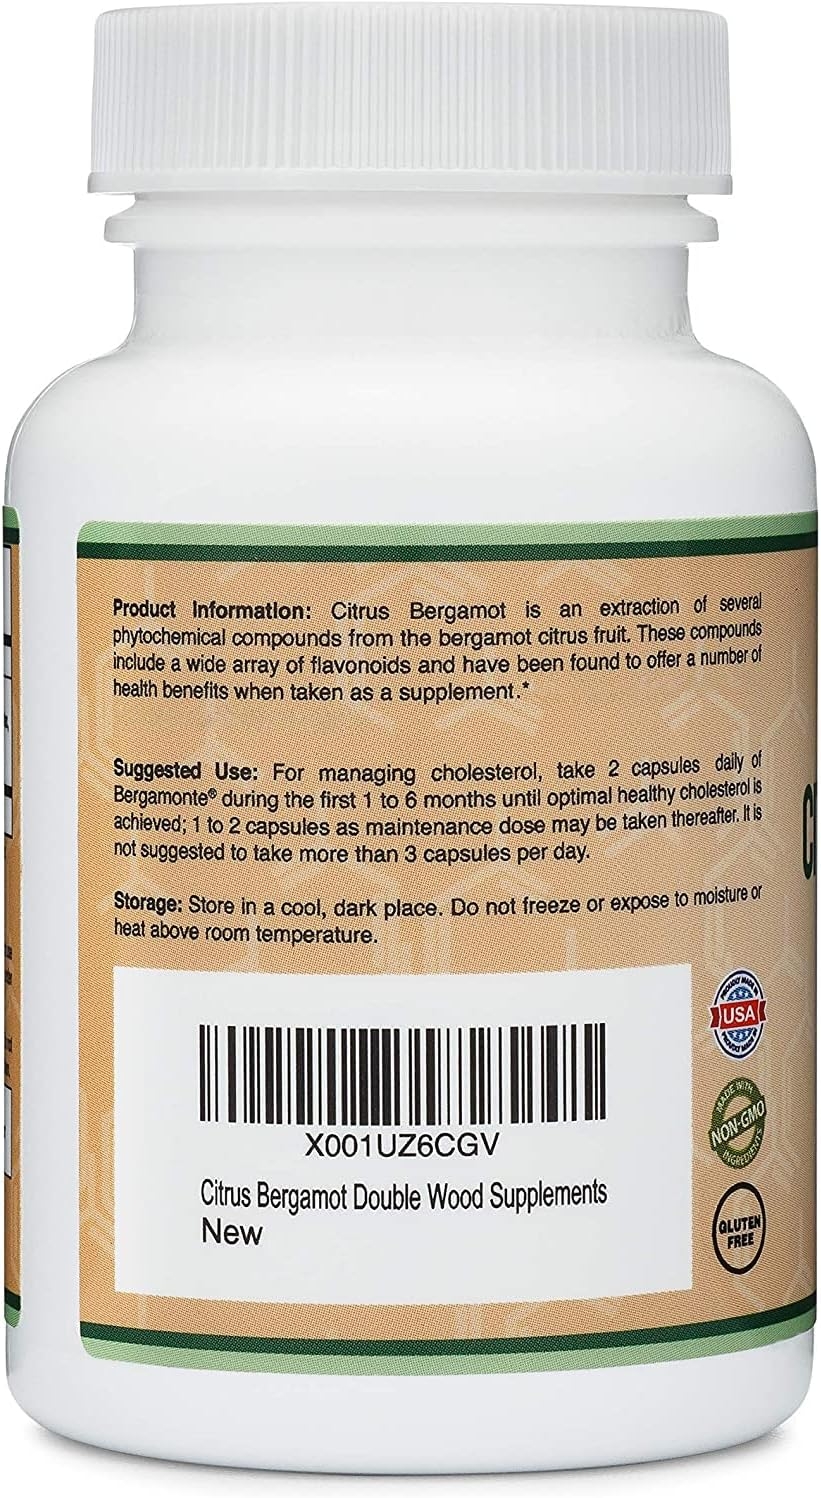 Citrus Bergamot Capsules 1,000mg Servinga (Patented Bergamonte Vegan Cholesterol Support Extract) Citrus Fruit Bioflavonoids Sourced from Italy and Manufactured in USA (60 Capsules) by Double Wood